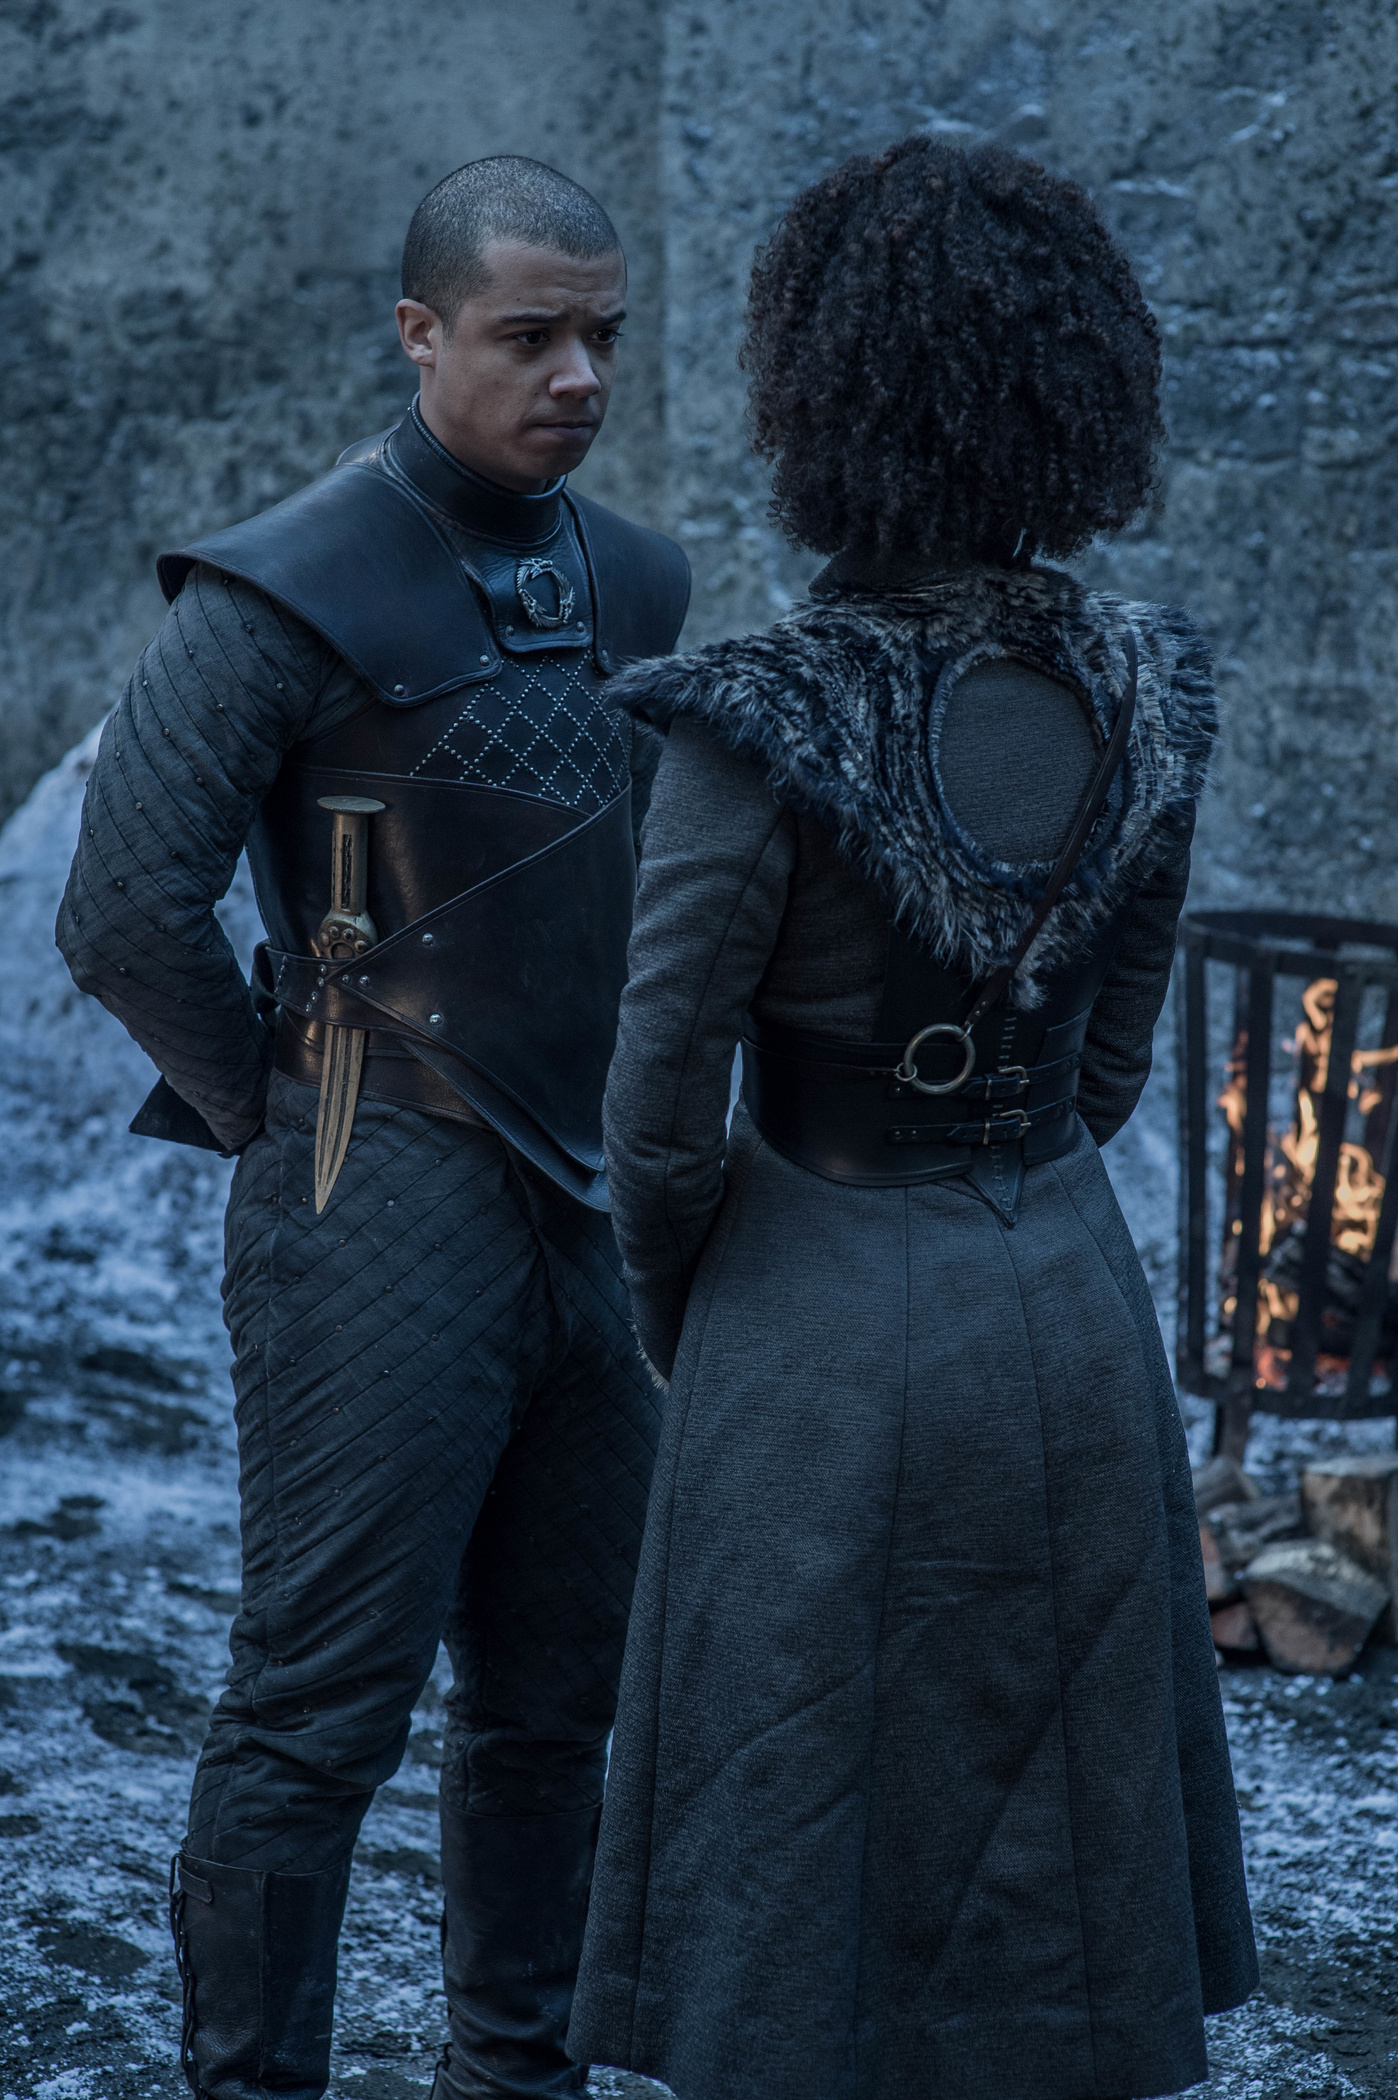 Jacob Anderson as Grey Worm and Nathalie Emmanuel as Missandei in 'Game of Thrones.'